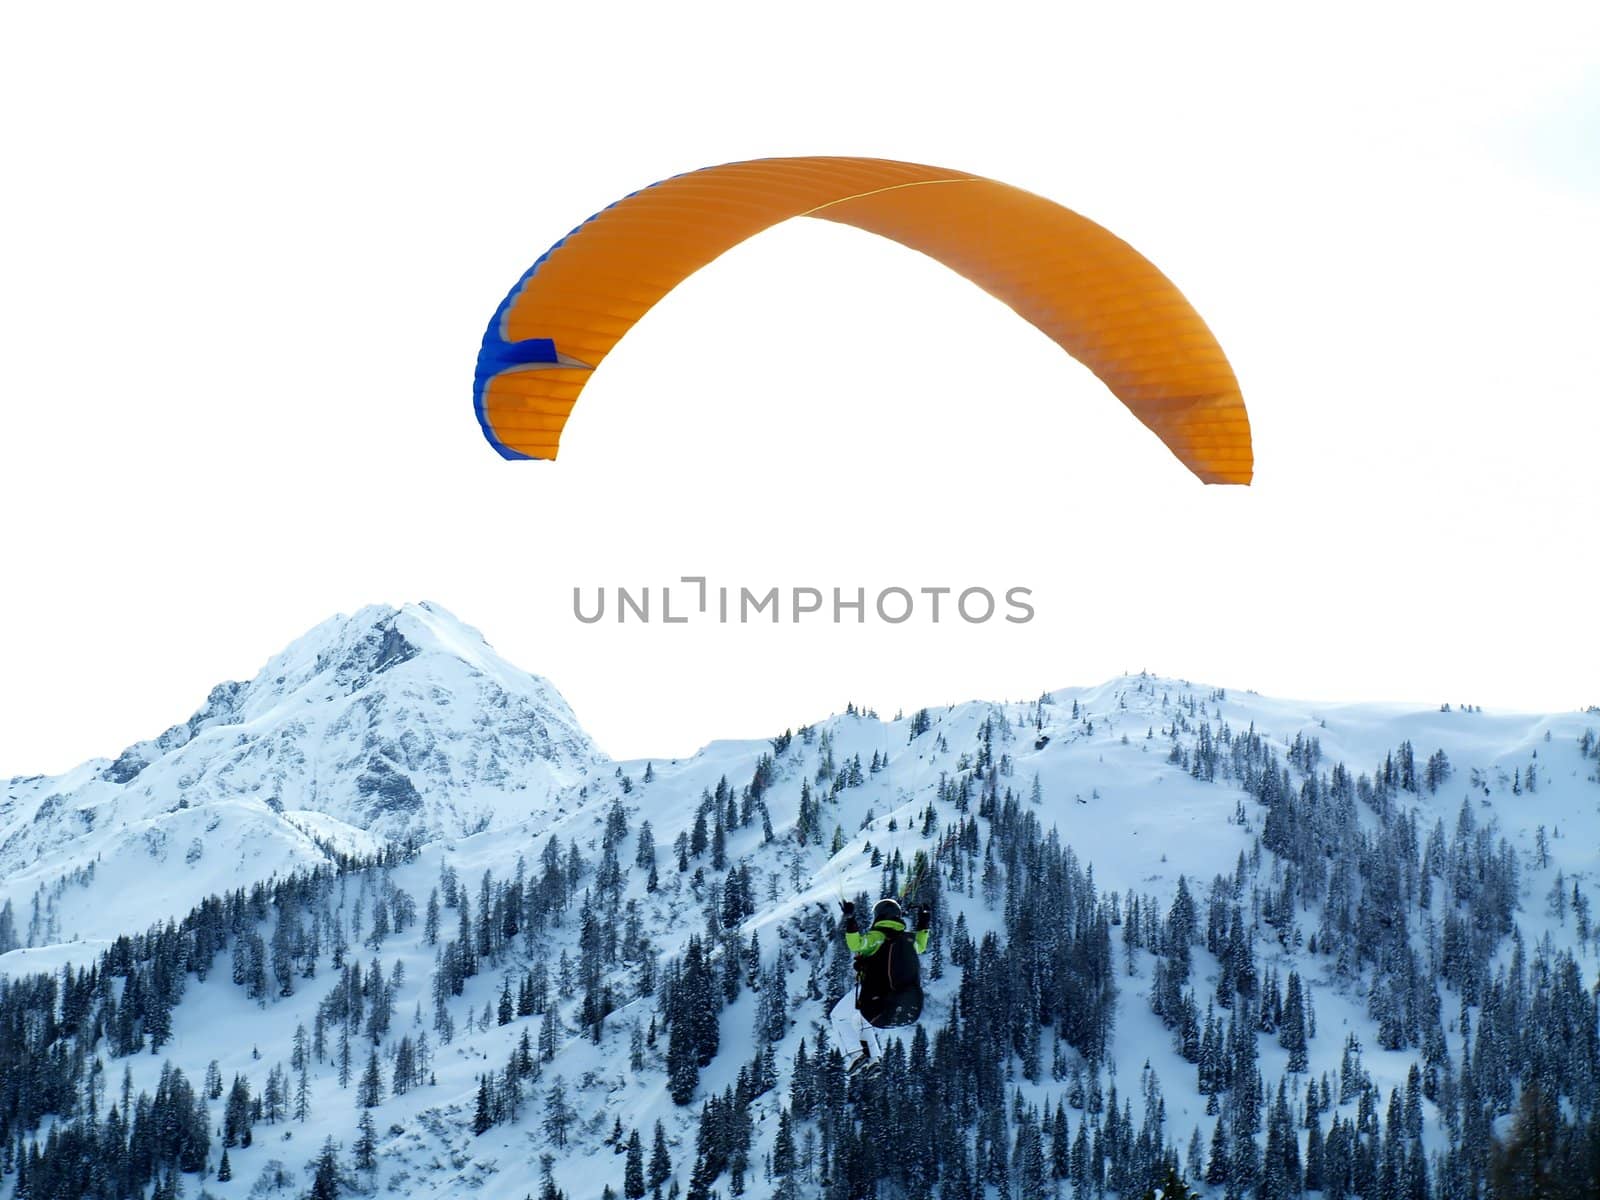 Paraglider with snowy mountain in the background.